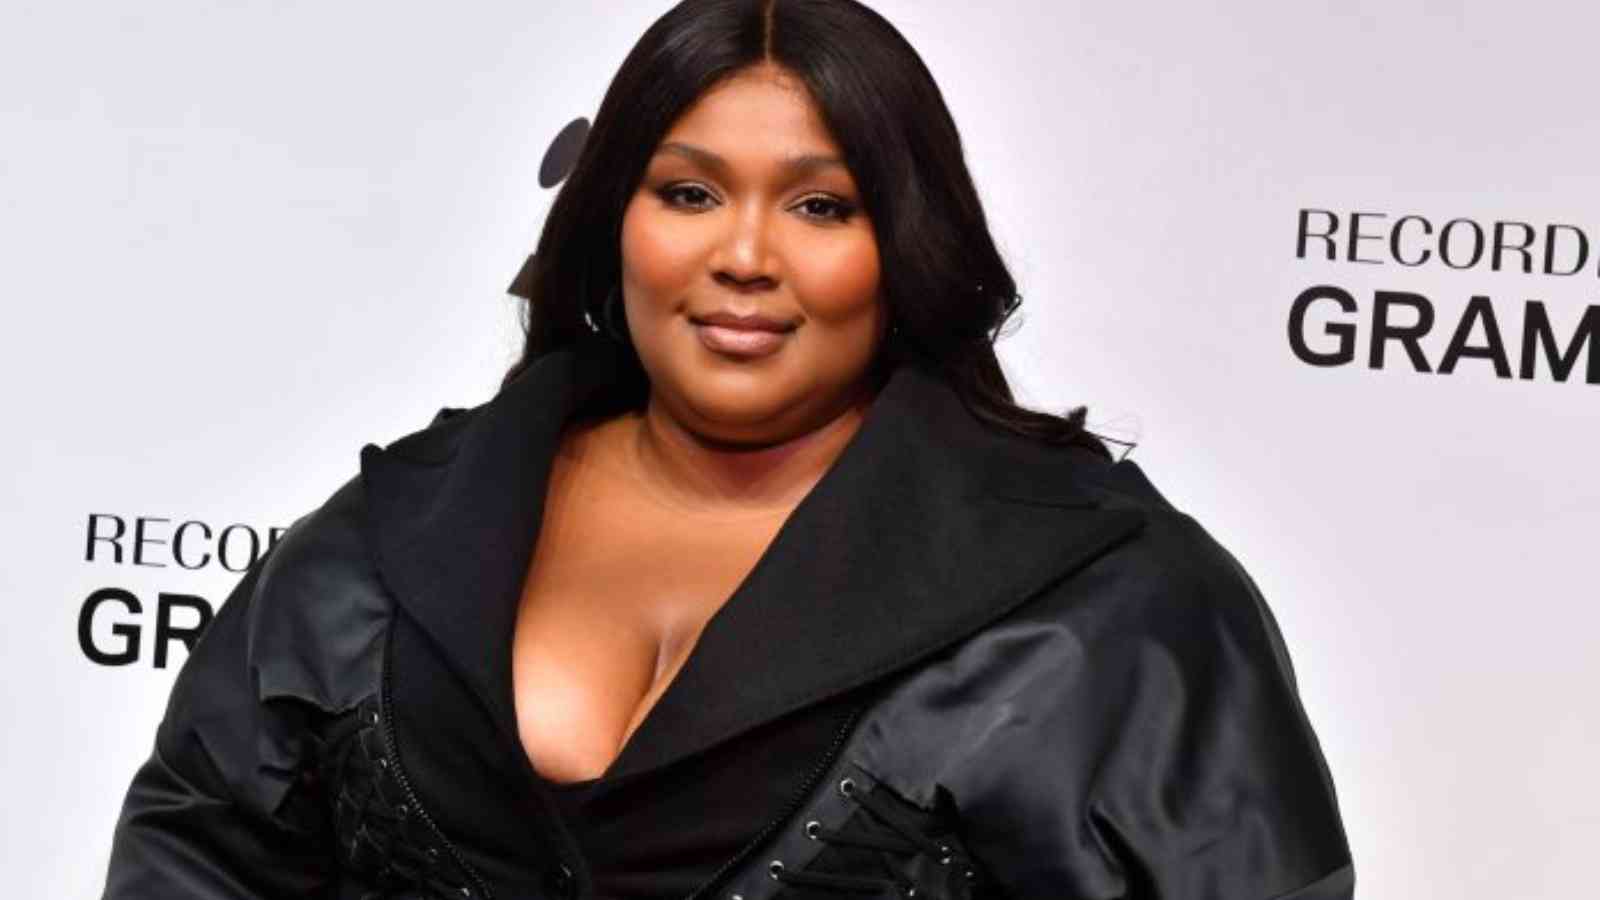 Lizzo Biography: Age, Height, Birthday, Family, Net Worth